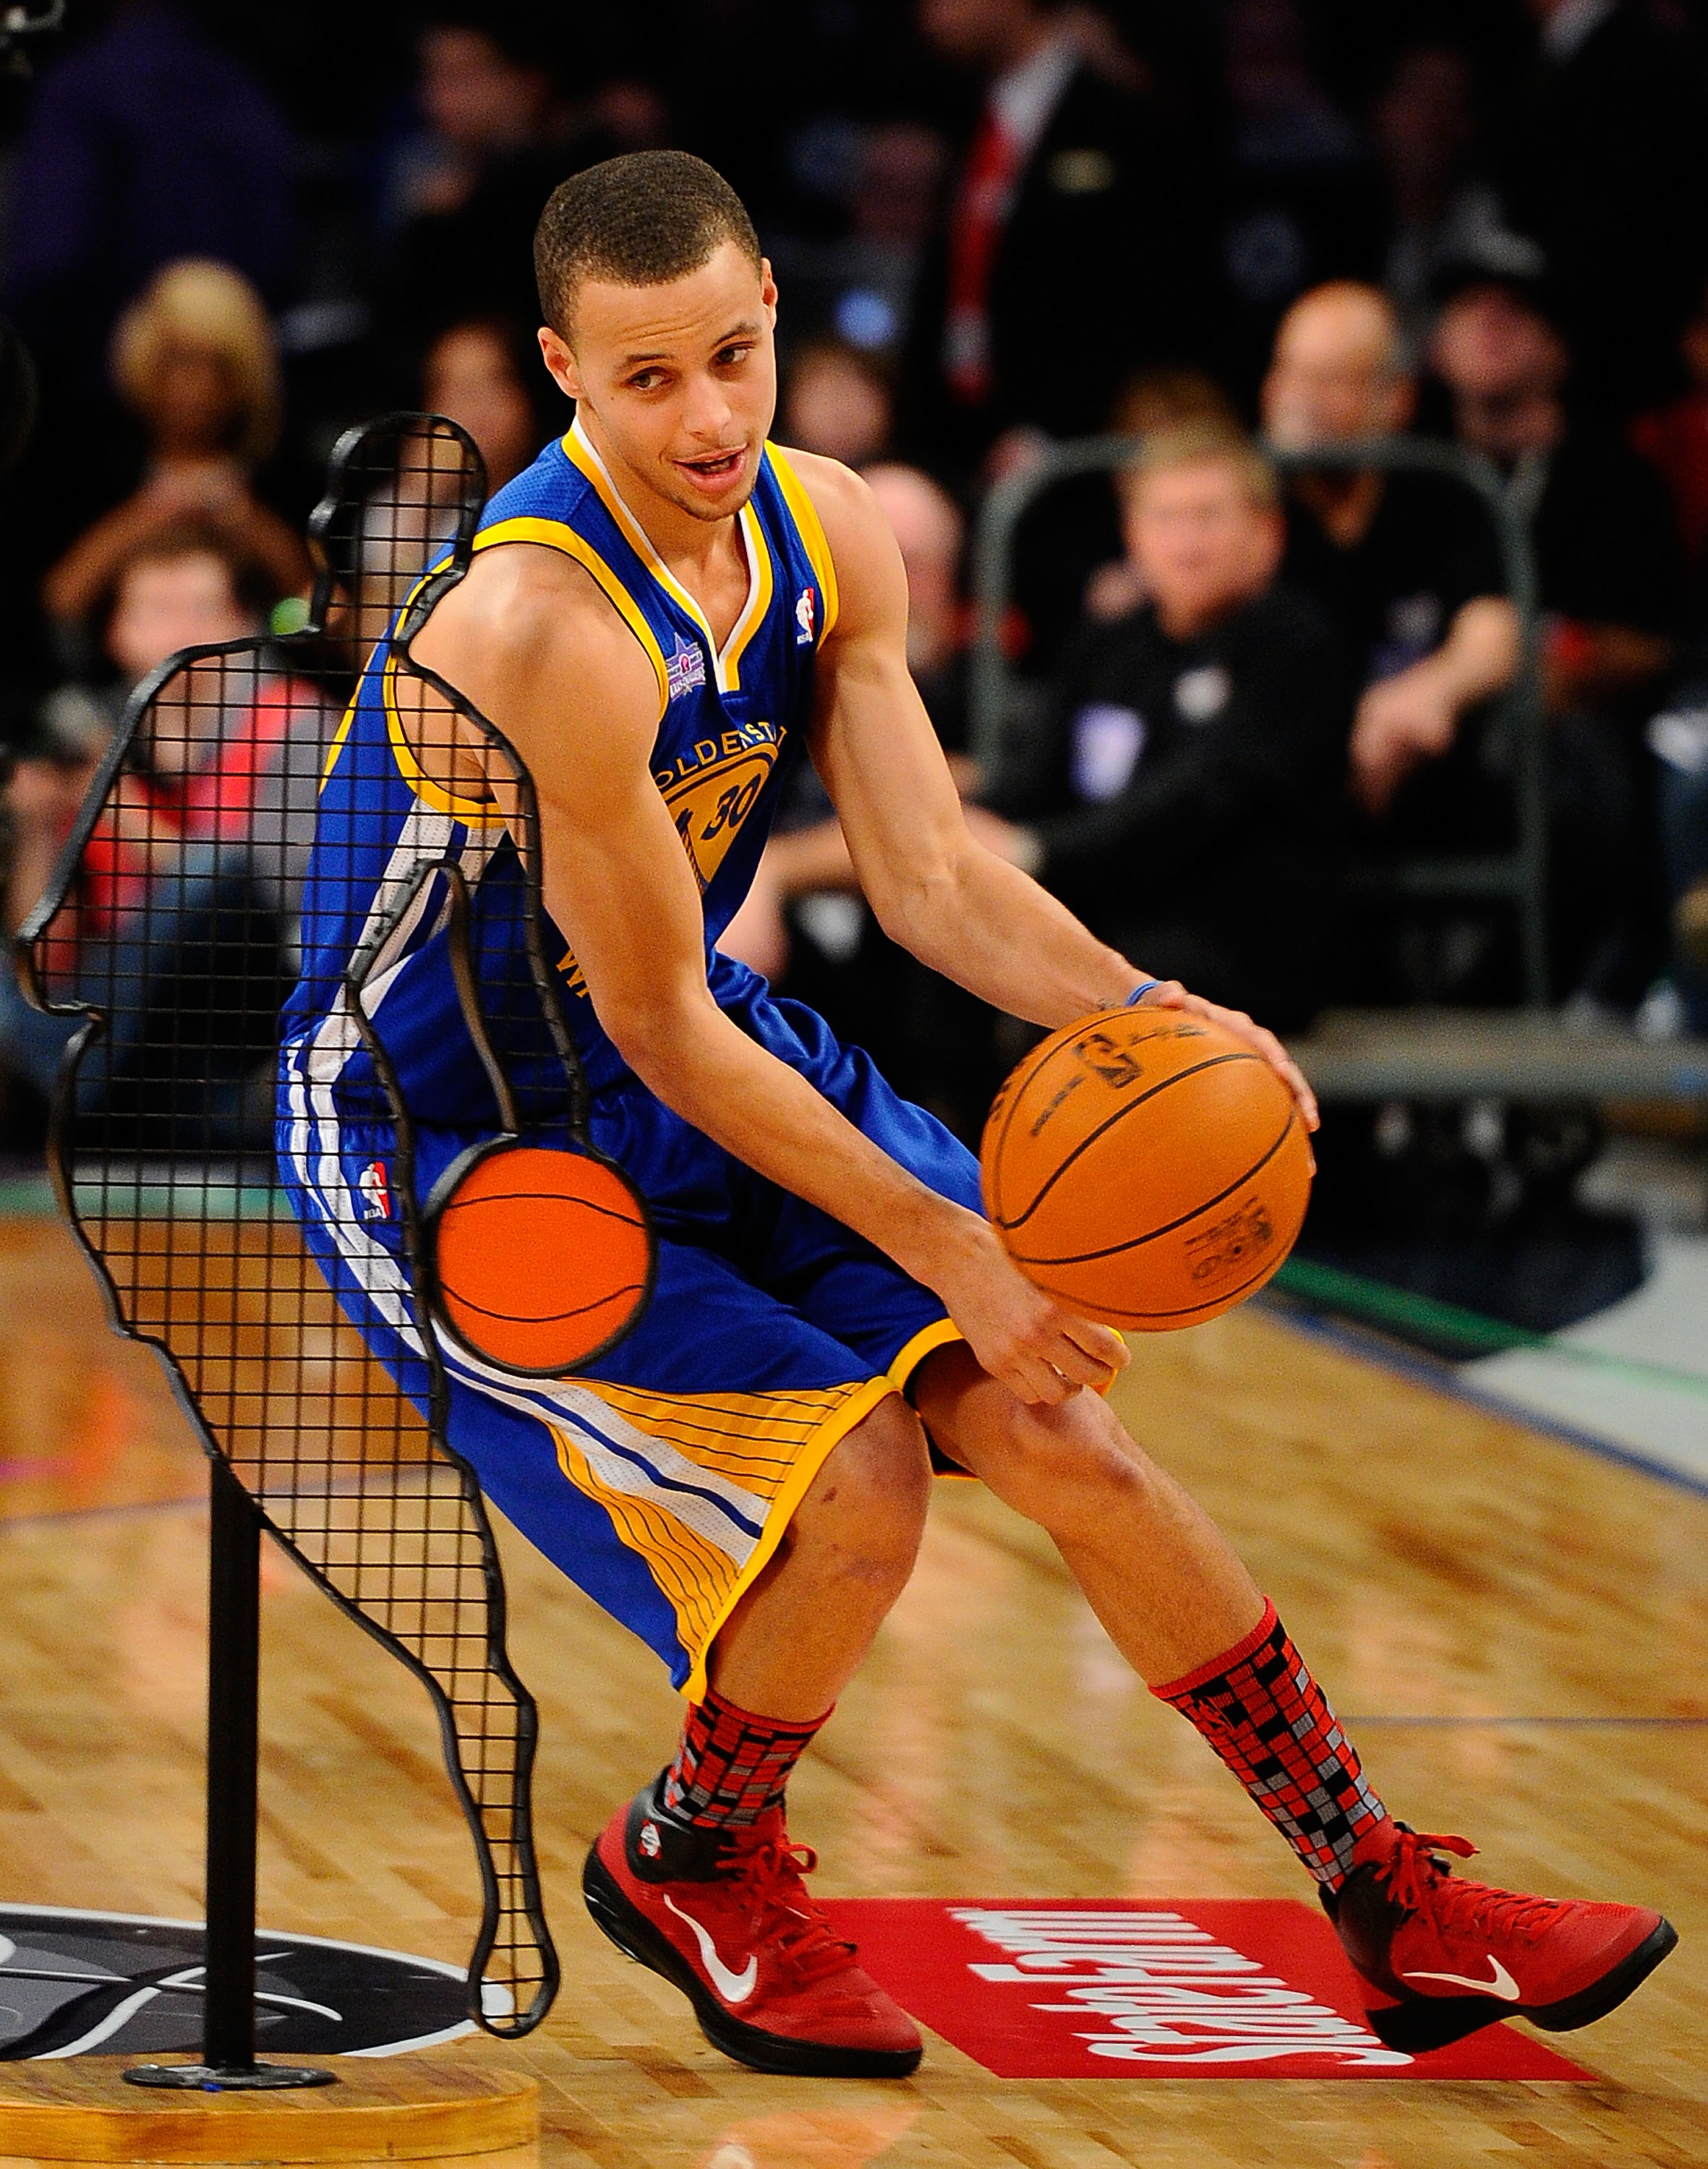 LOS ANGELES, CA - FEBRUARY 19:  Stephen Curry #30 of the Golden State Warriors competes in the Taco Bell Skills Challenge apart of NBA All-Star Saturday Night at Staples Center on February 19, 2011 in Los Angeles, California.  (Photo by Kevork Djansezian/